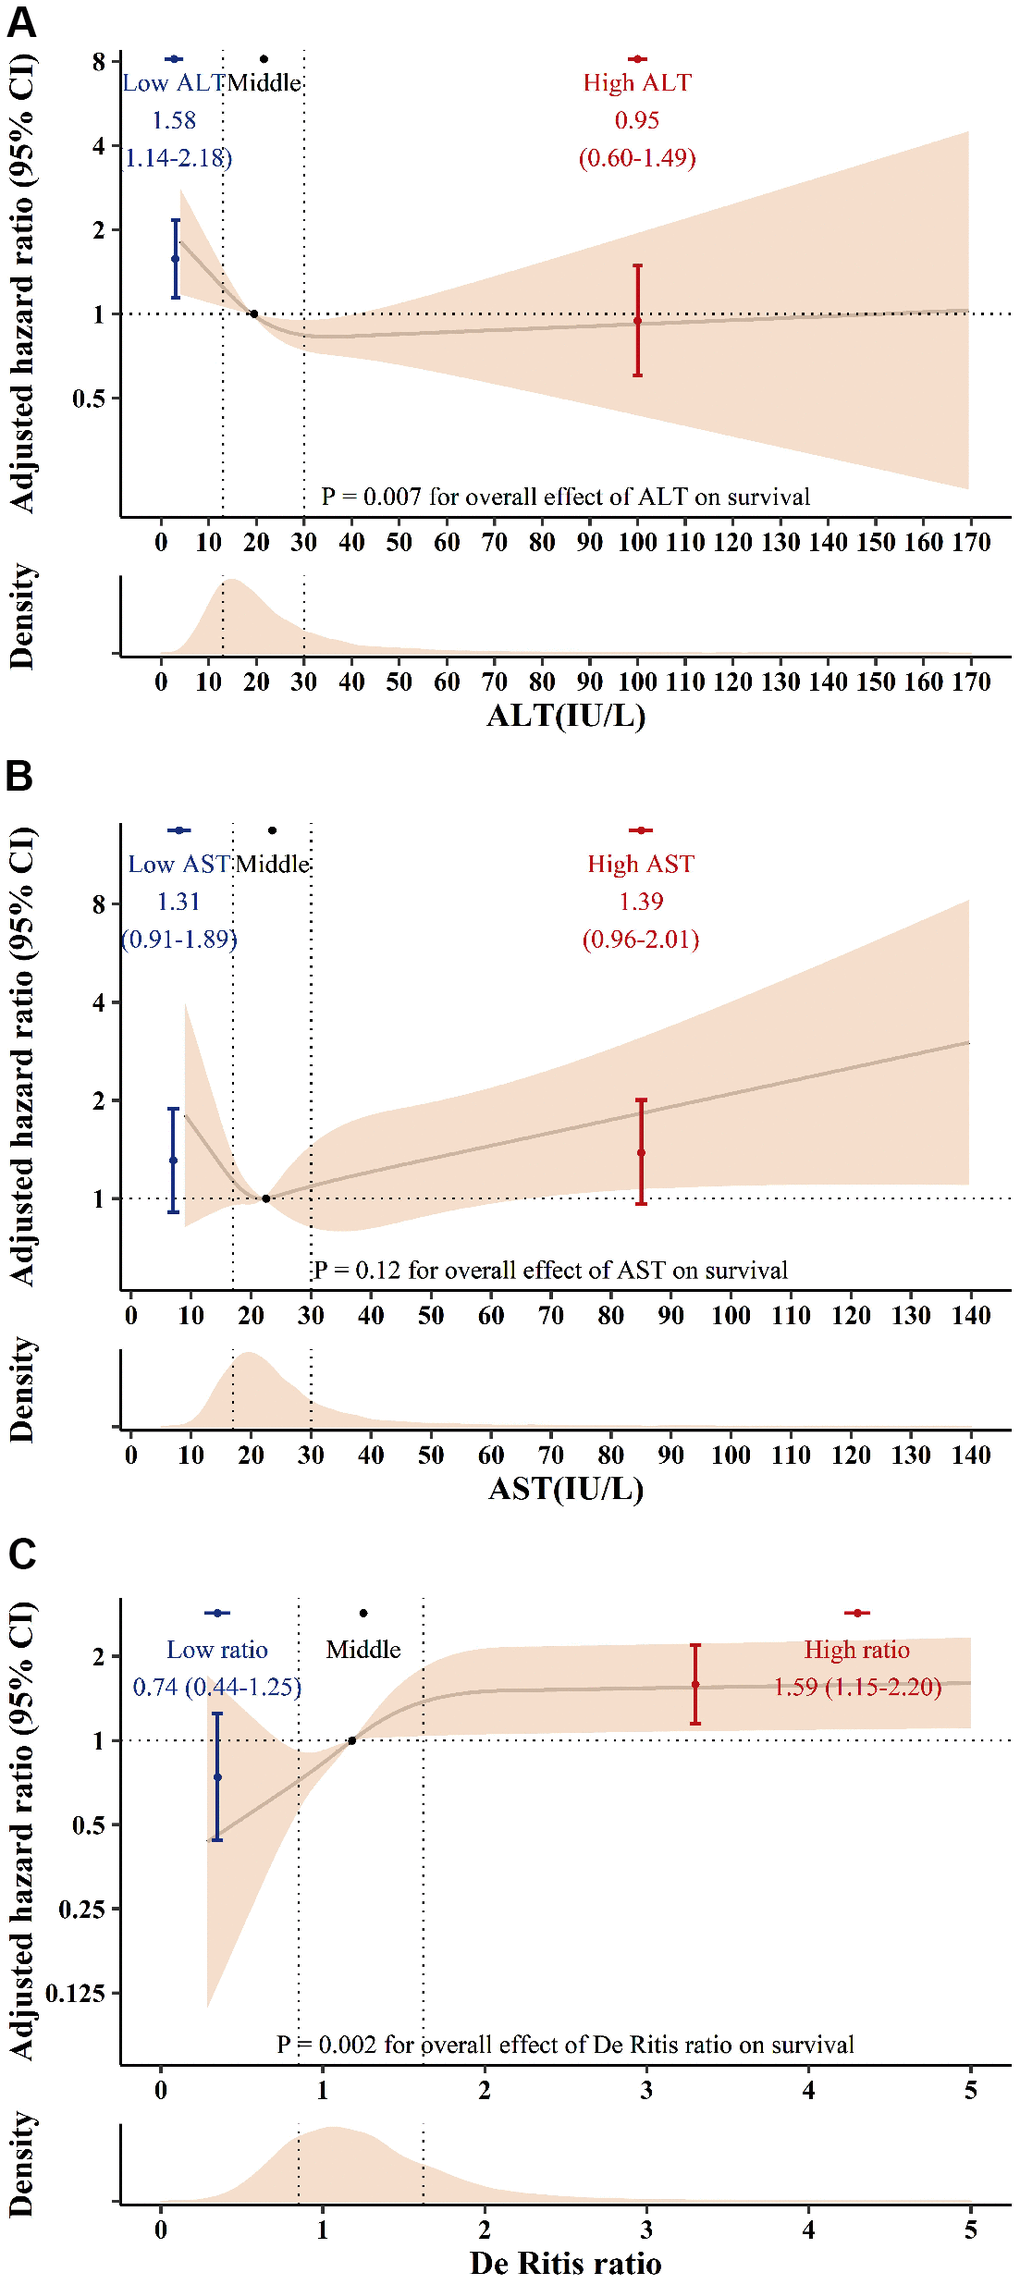 The adjusted hazard ratio for ALT (A), AST (B) and the De Ritis ratio (C) for postoperative 90-day mortality. Solid lines indicate the hazard ratio according to ALT, AST, and De Ritis ratio splines with medians (19 IU/L for ALT, 22 IU/L for AST and 1.18 for the De Ritis ratio) as a reference. The shaded area represents the 95% confidence interval. Dots indicate the hazard ratio according to ALT, AST, and De Ritis ratio groups. Error bars represent the 95% confidence intervals. SI conversion factors: To convert ALT and AST to μkat/L, multiply values by 0.0167. ALT: alanine aminotransferase; AST: aspartate aminotransferase; CI: confidence interval.